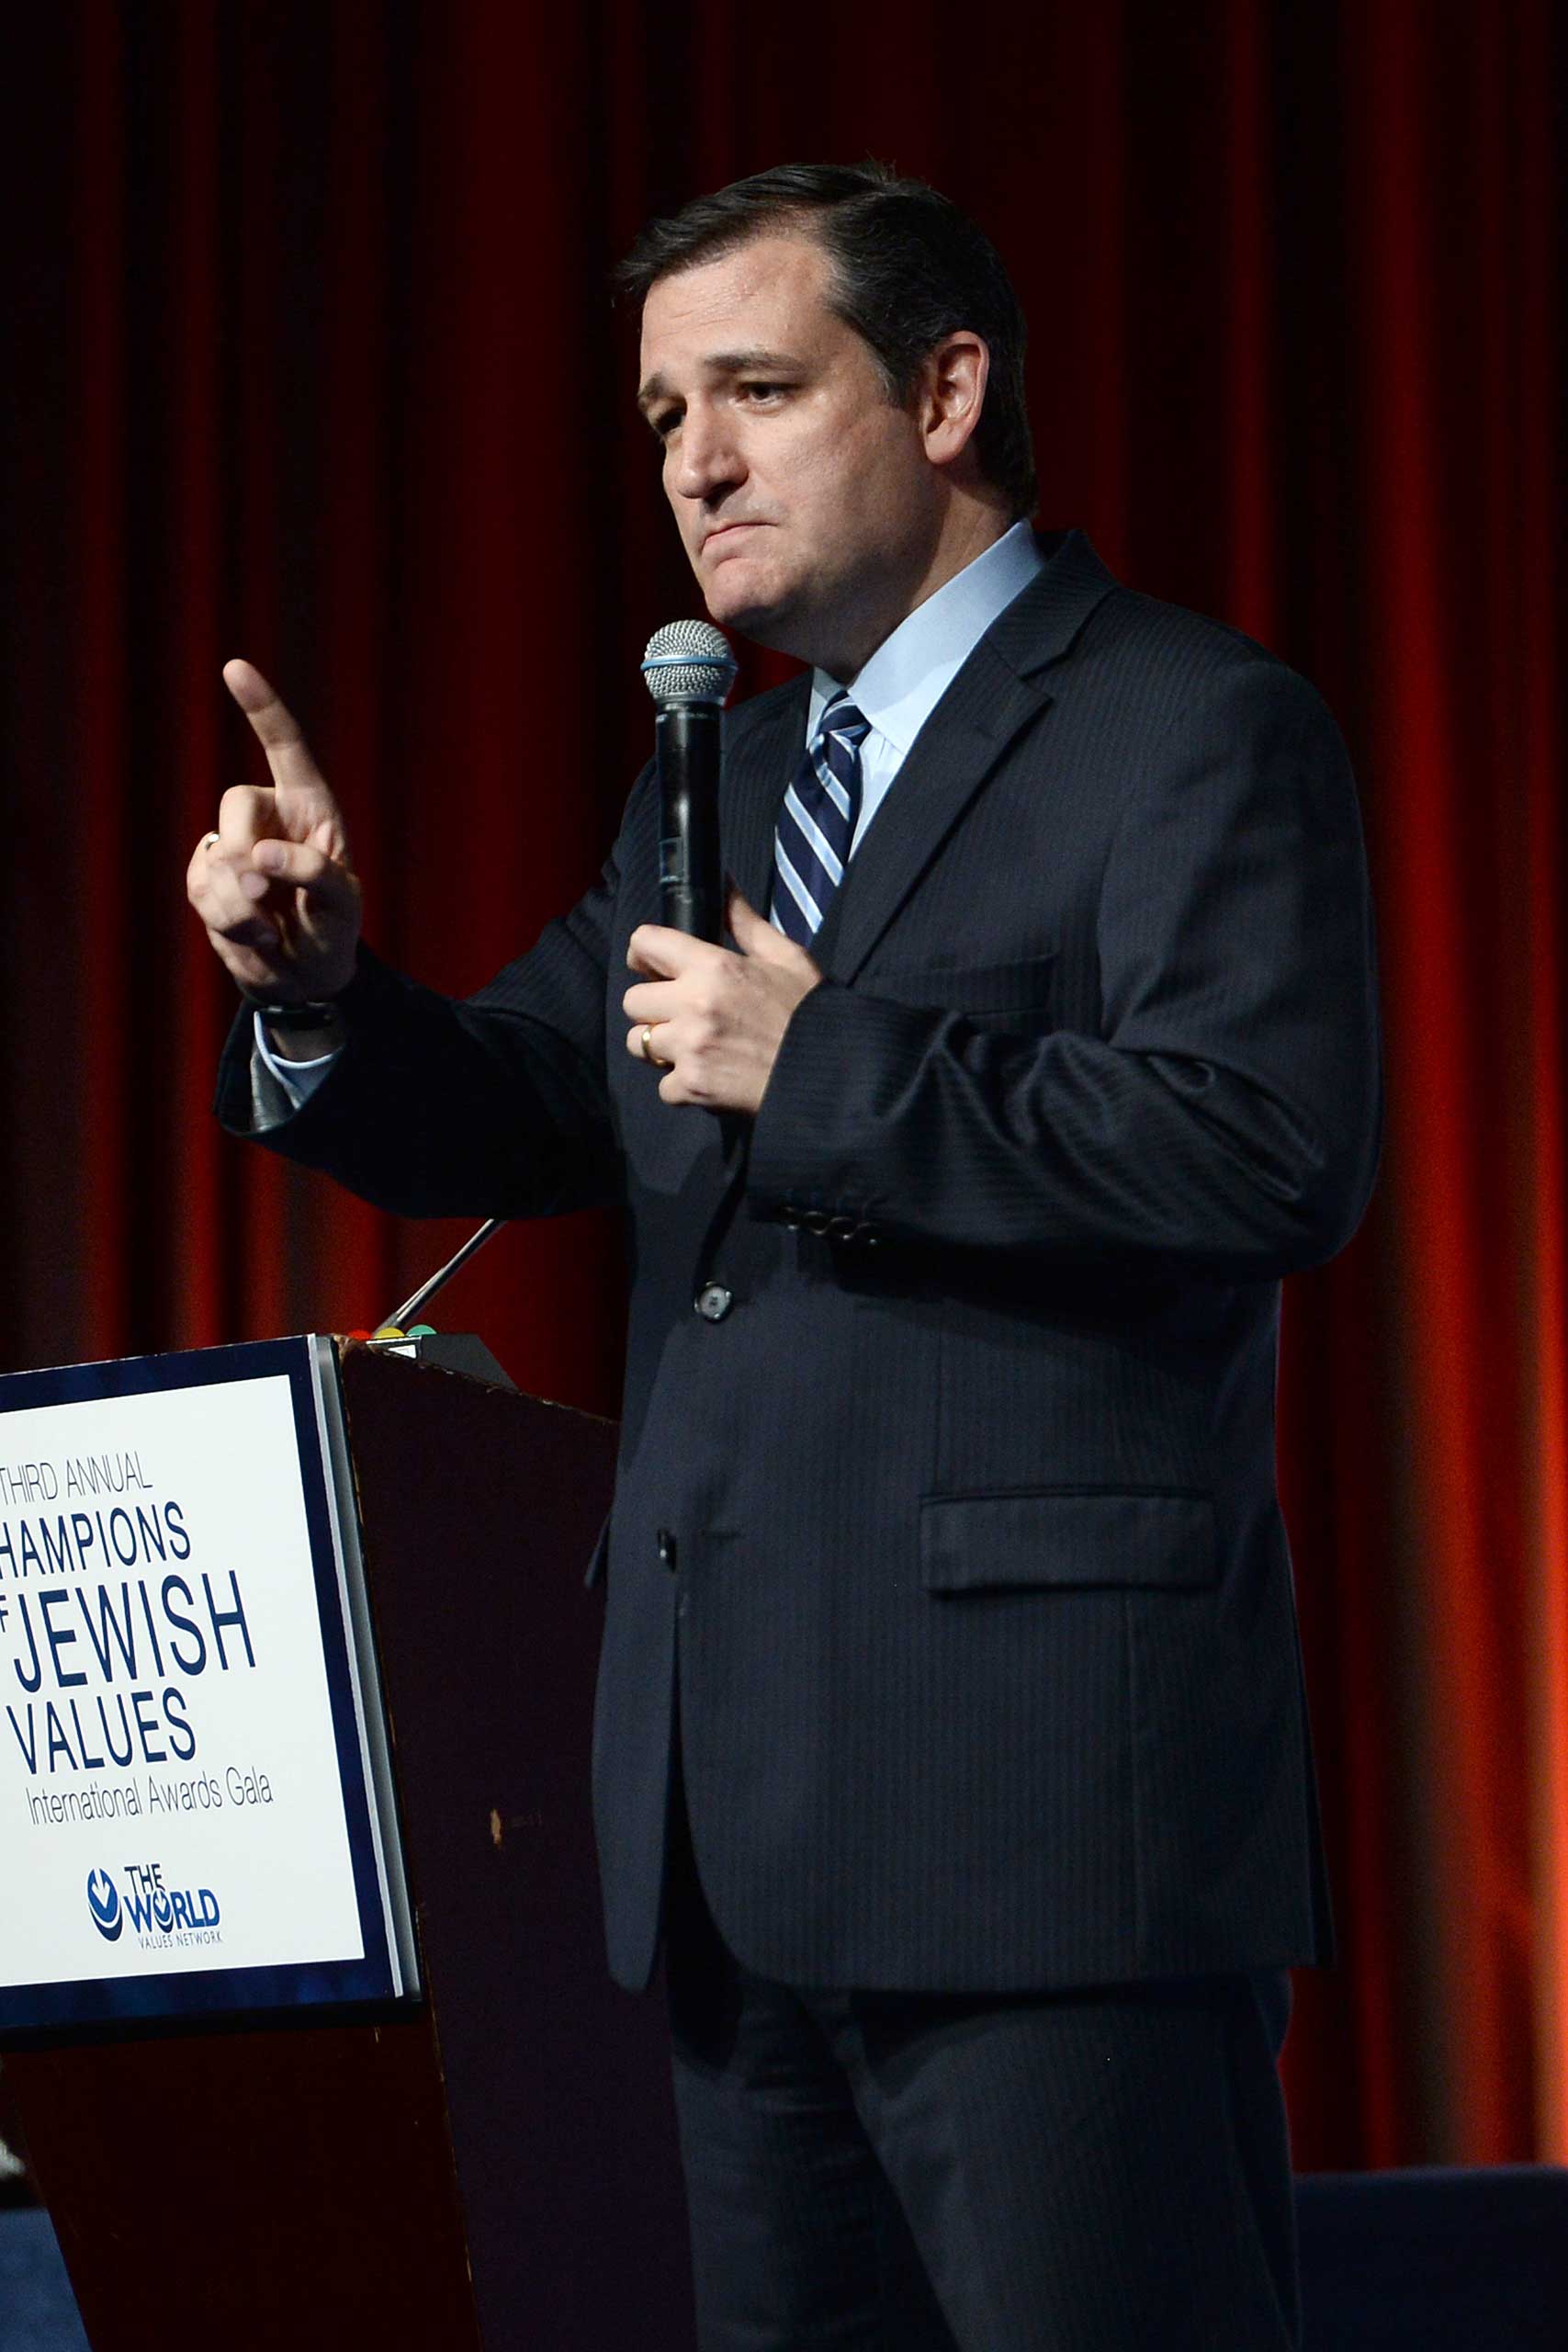 U.S. Senator Ted Cruz of Texas speaks at the annual Champion of Jewish Values International Awards Gala at the Marriott Marquis Hotel in New York, NY, on May 28, 2015. (Behar Anthony — AP)